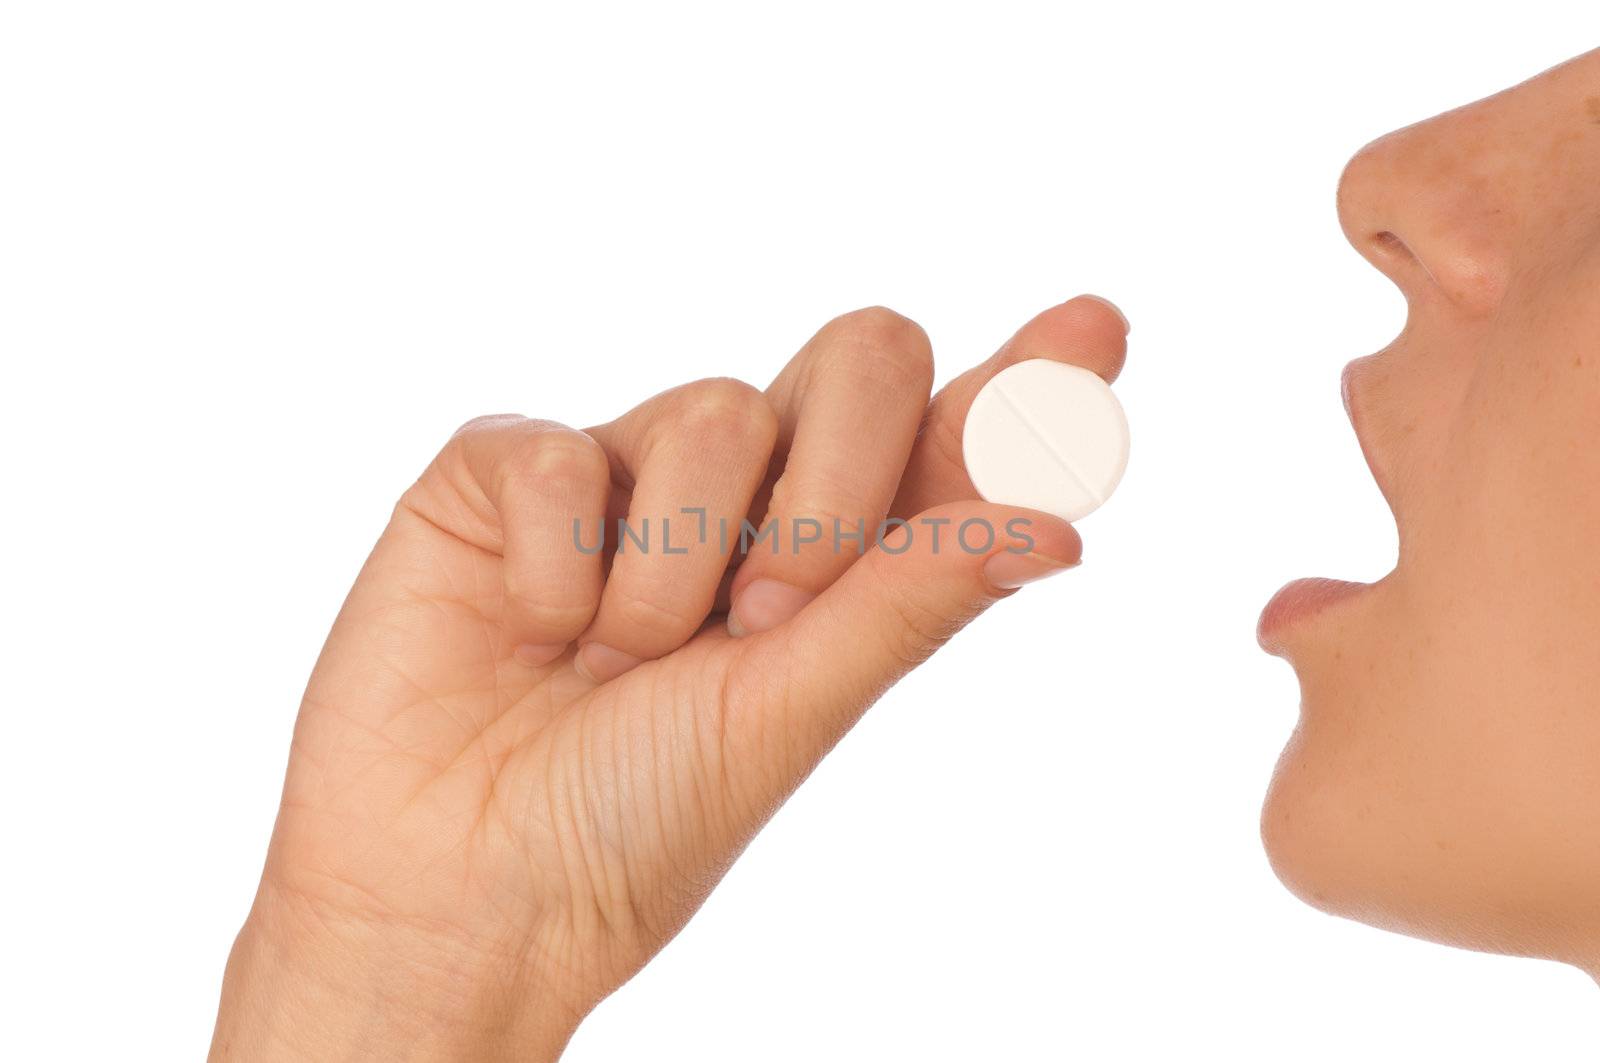 woman taking narcotic in a shape of white pill